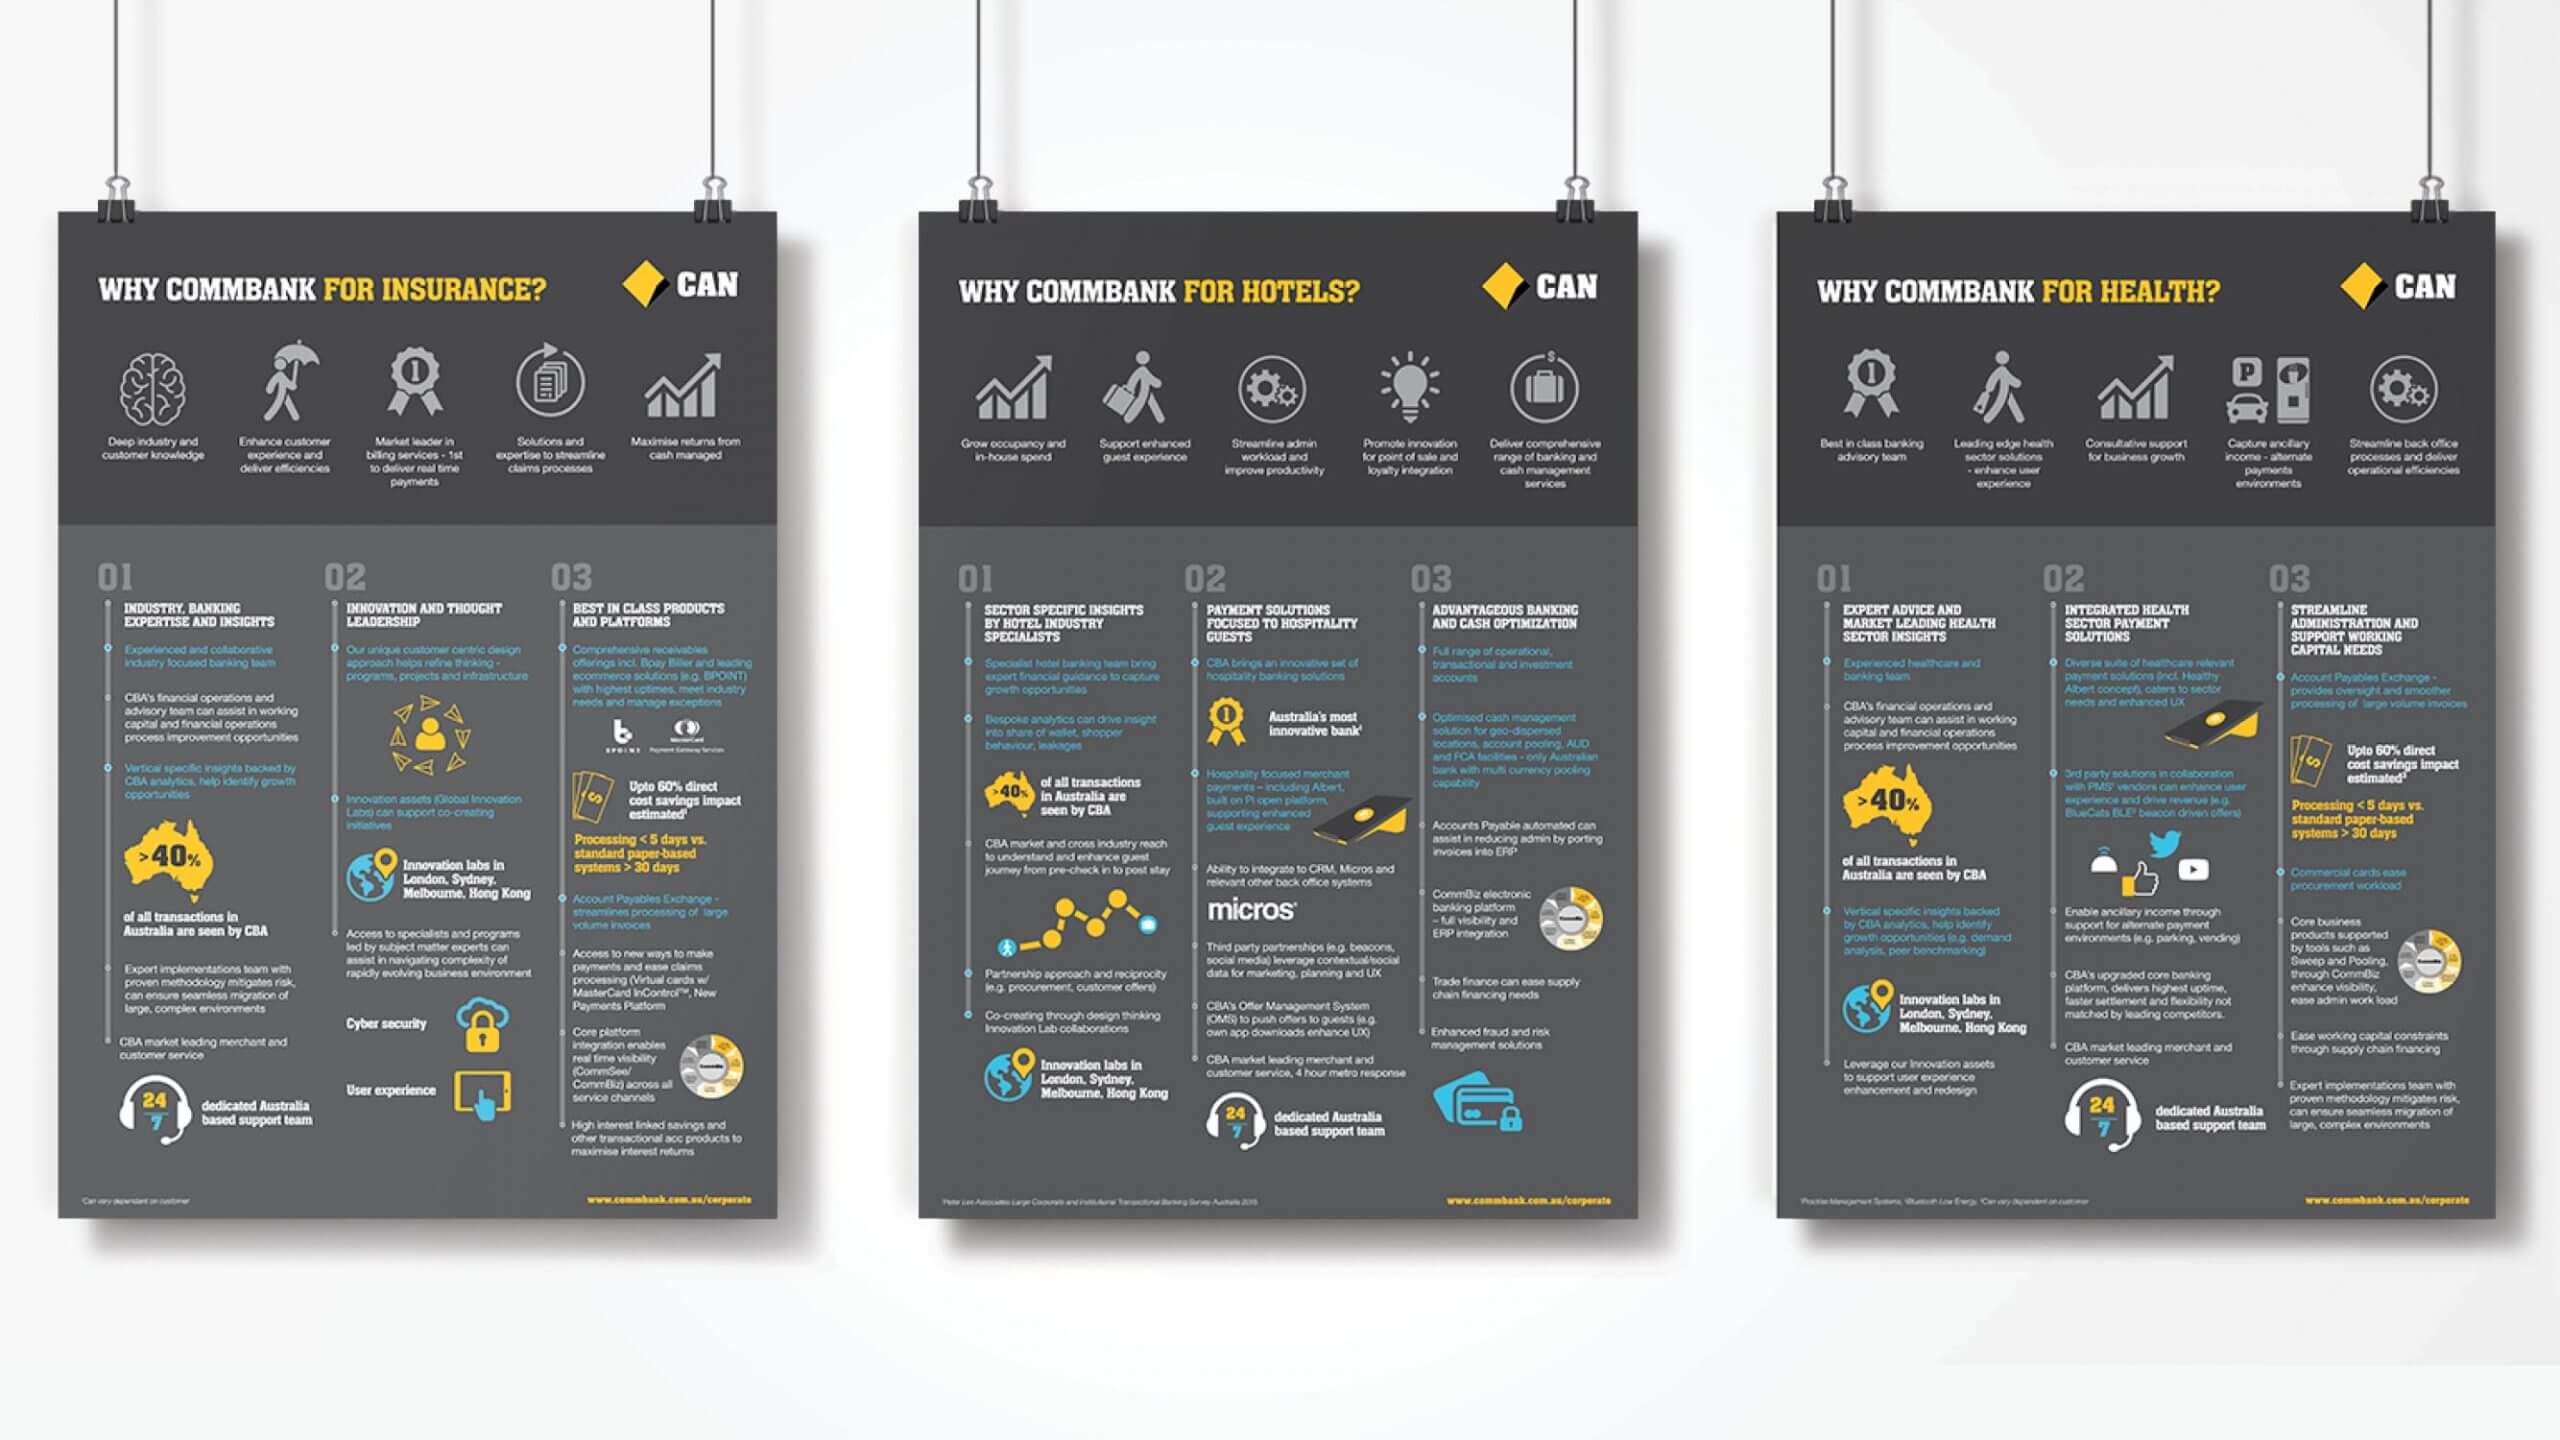 MasterCard Advisors CommBank infographic design by Think Creative Agency